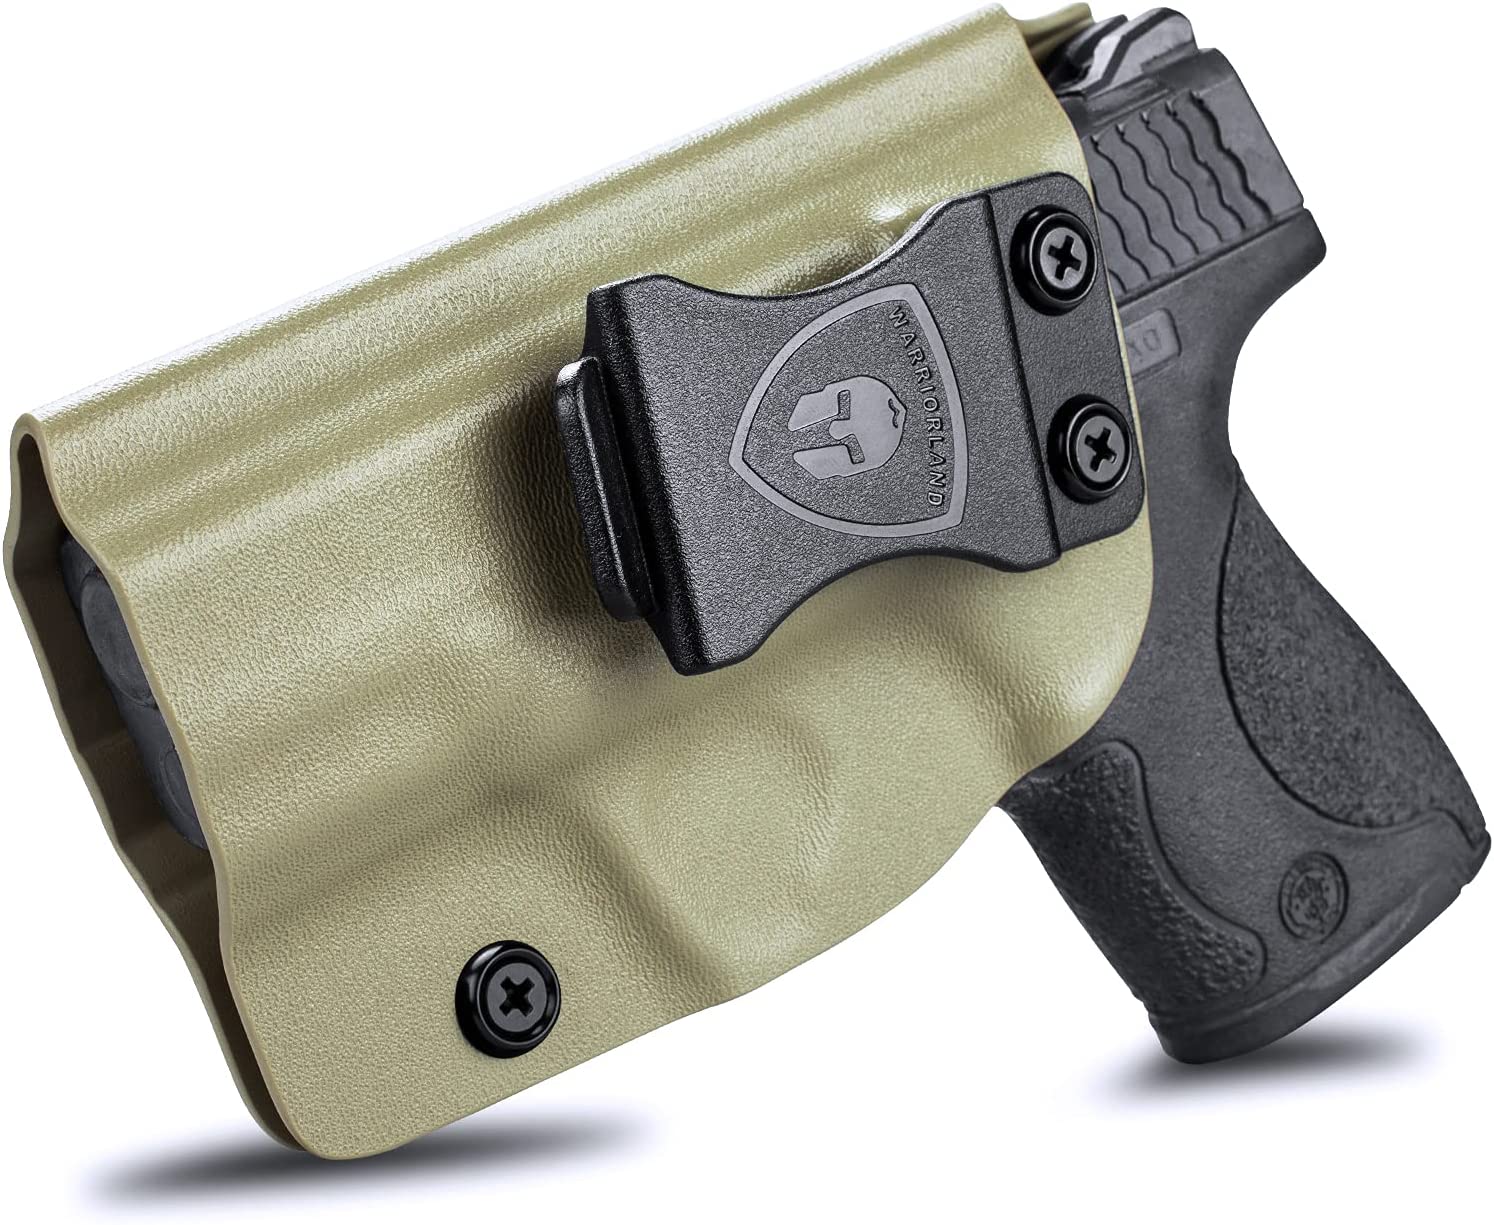 Tan Smith & Wesson Kydex IWB Holster M&P Shield Plus M2.0  M1.0  9mm/.40 Pistol Right/ Left Handed